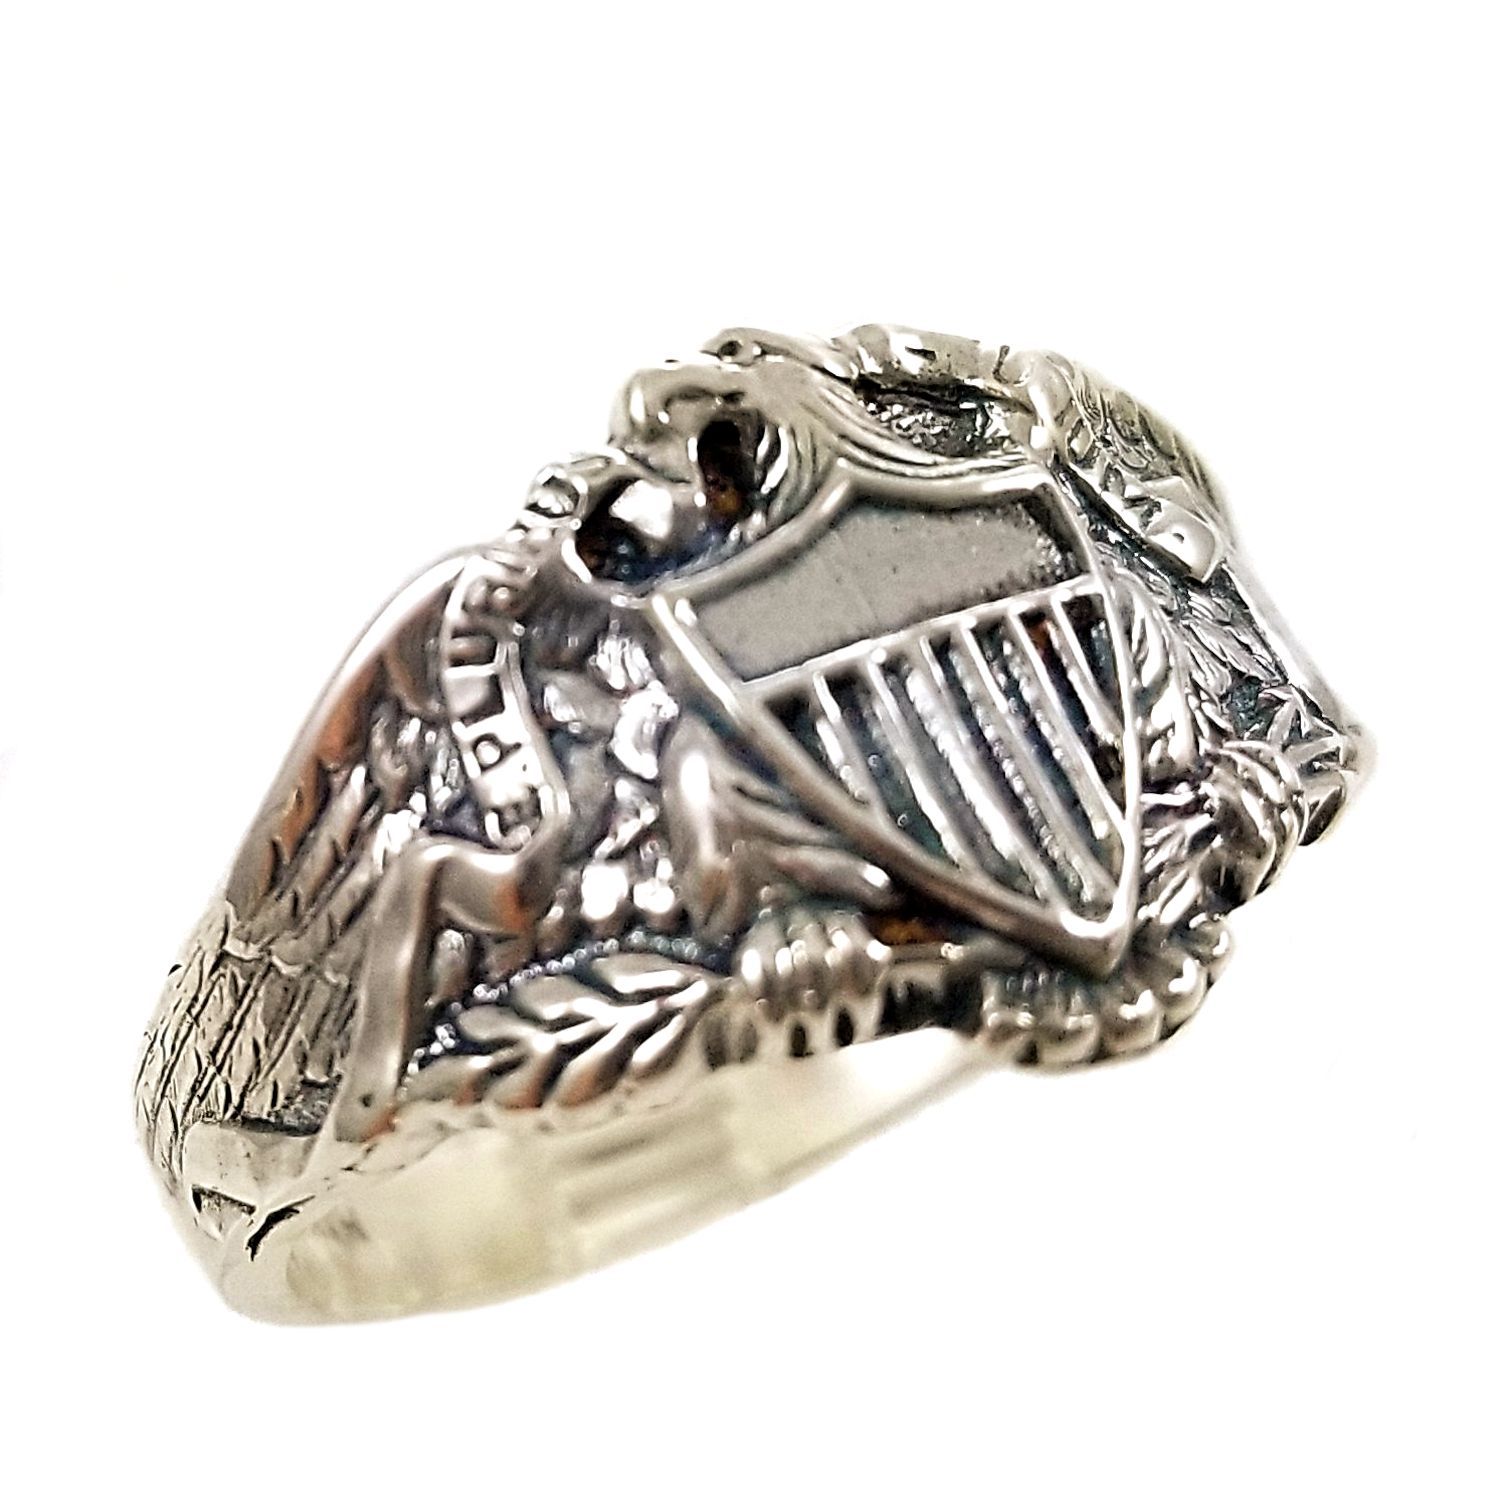 eagle falcon ring heavy sterling silver 925 man biker ring all sizes h –  Abu Mariam Jewelry